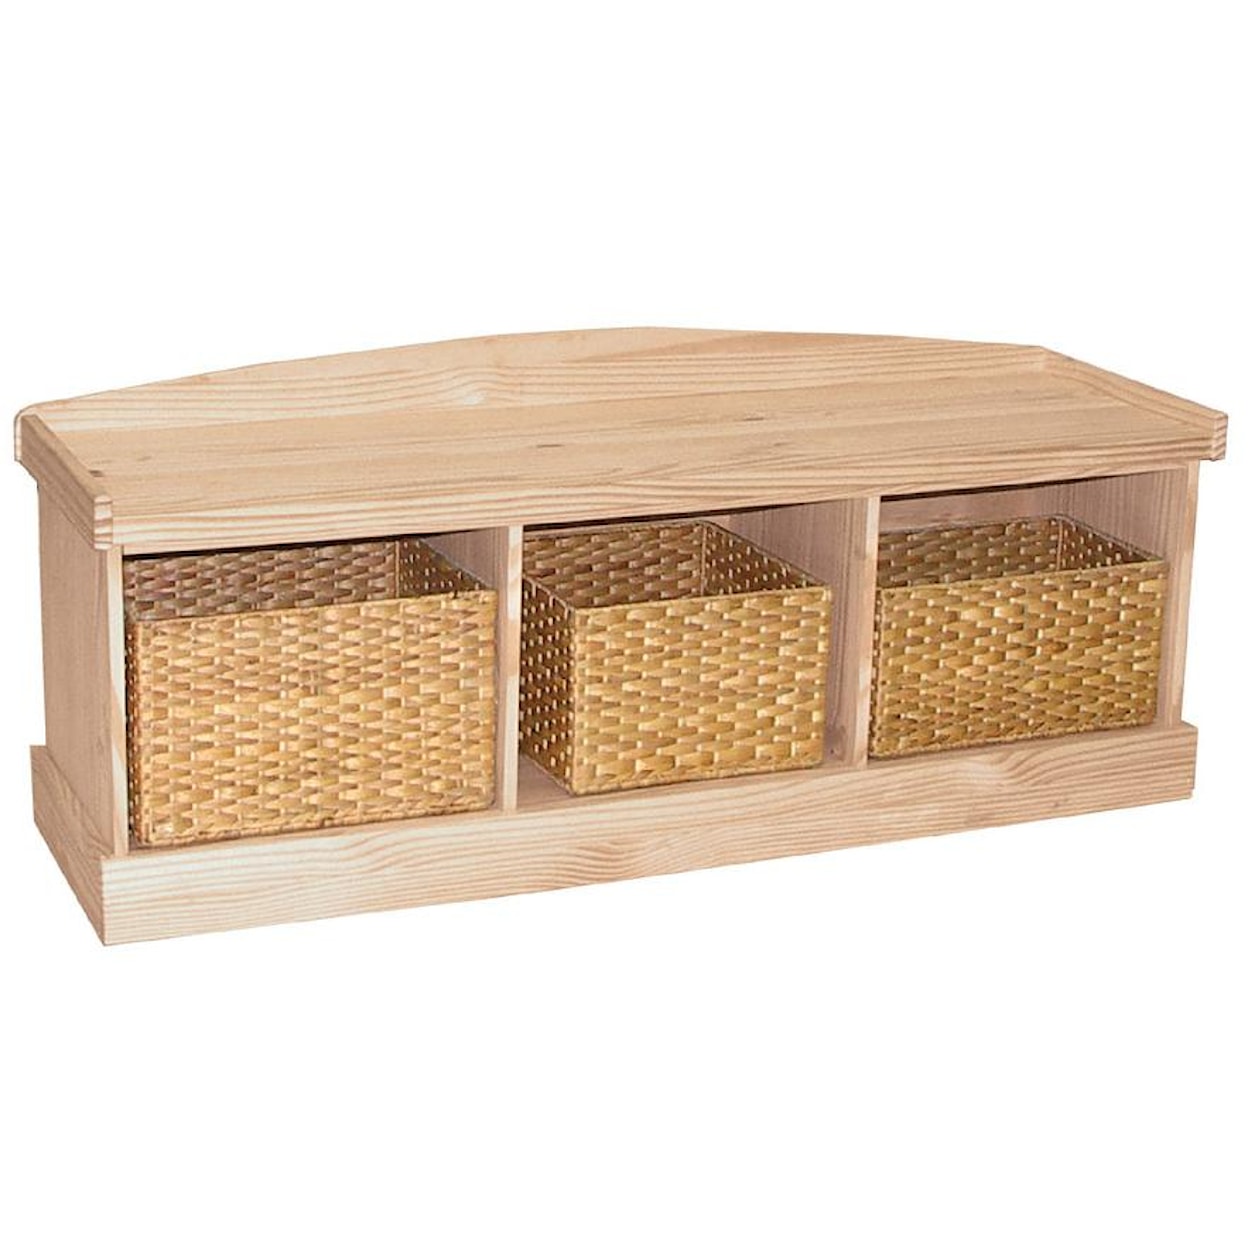 John Thomas SELECT Occasional & Accents Entry Bench